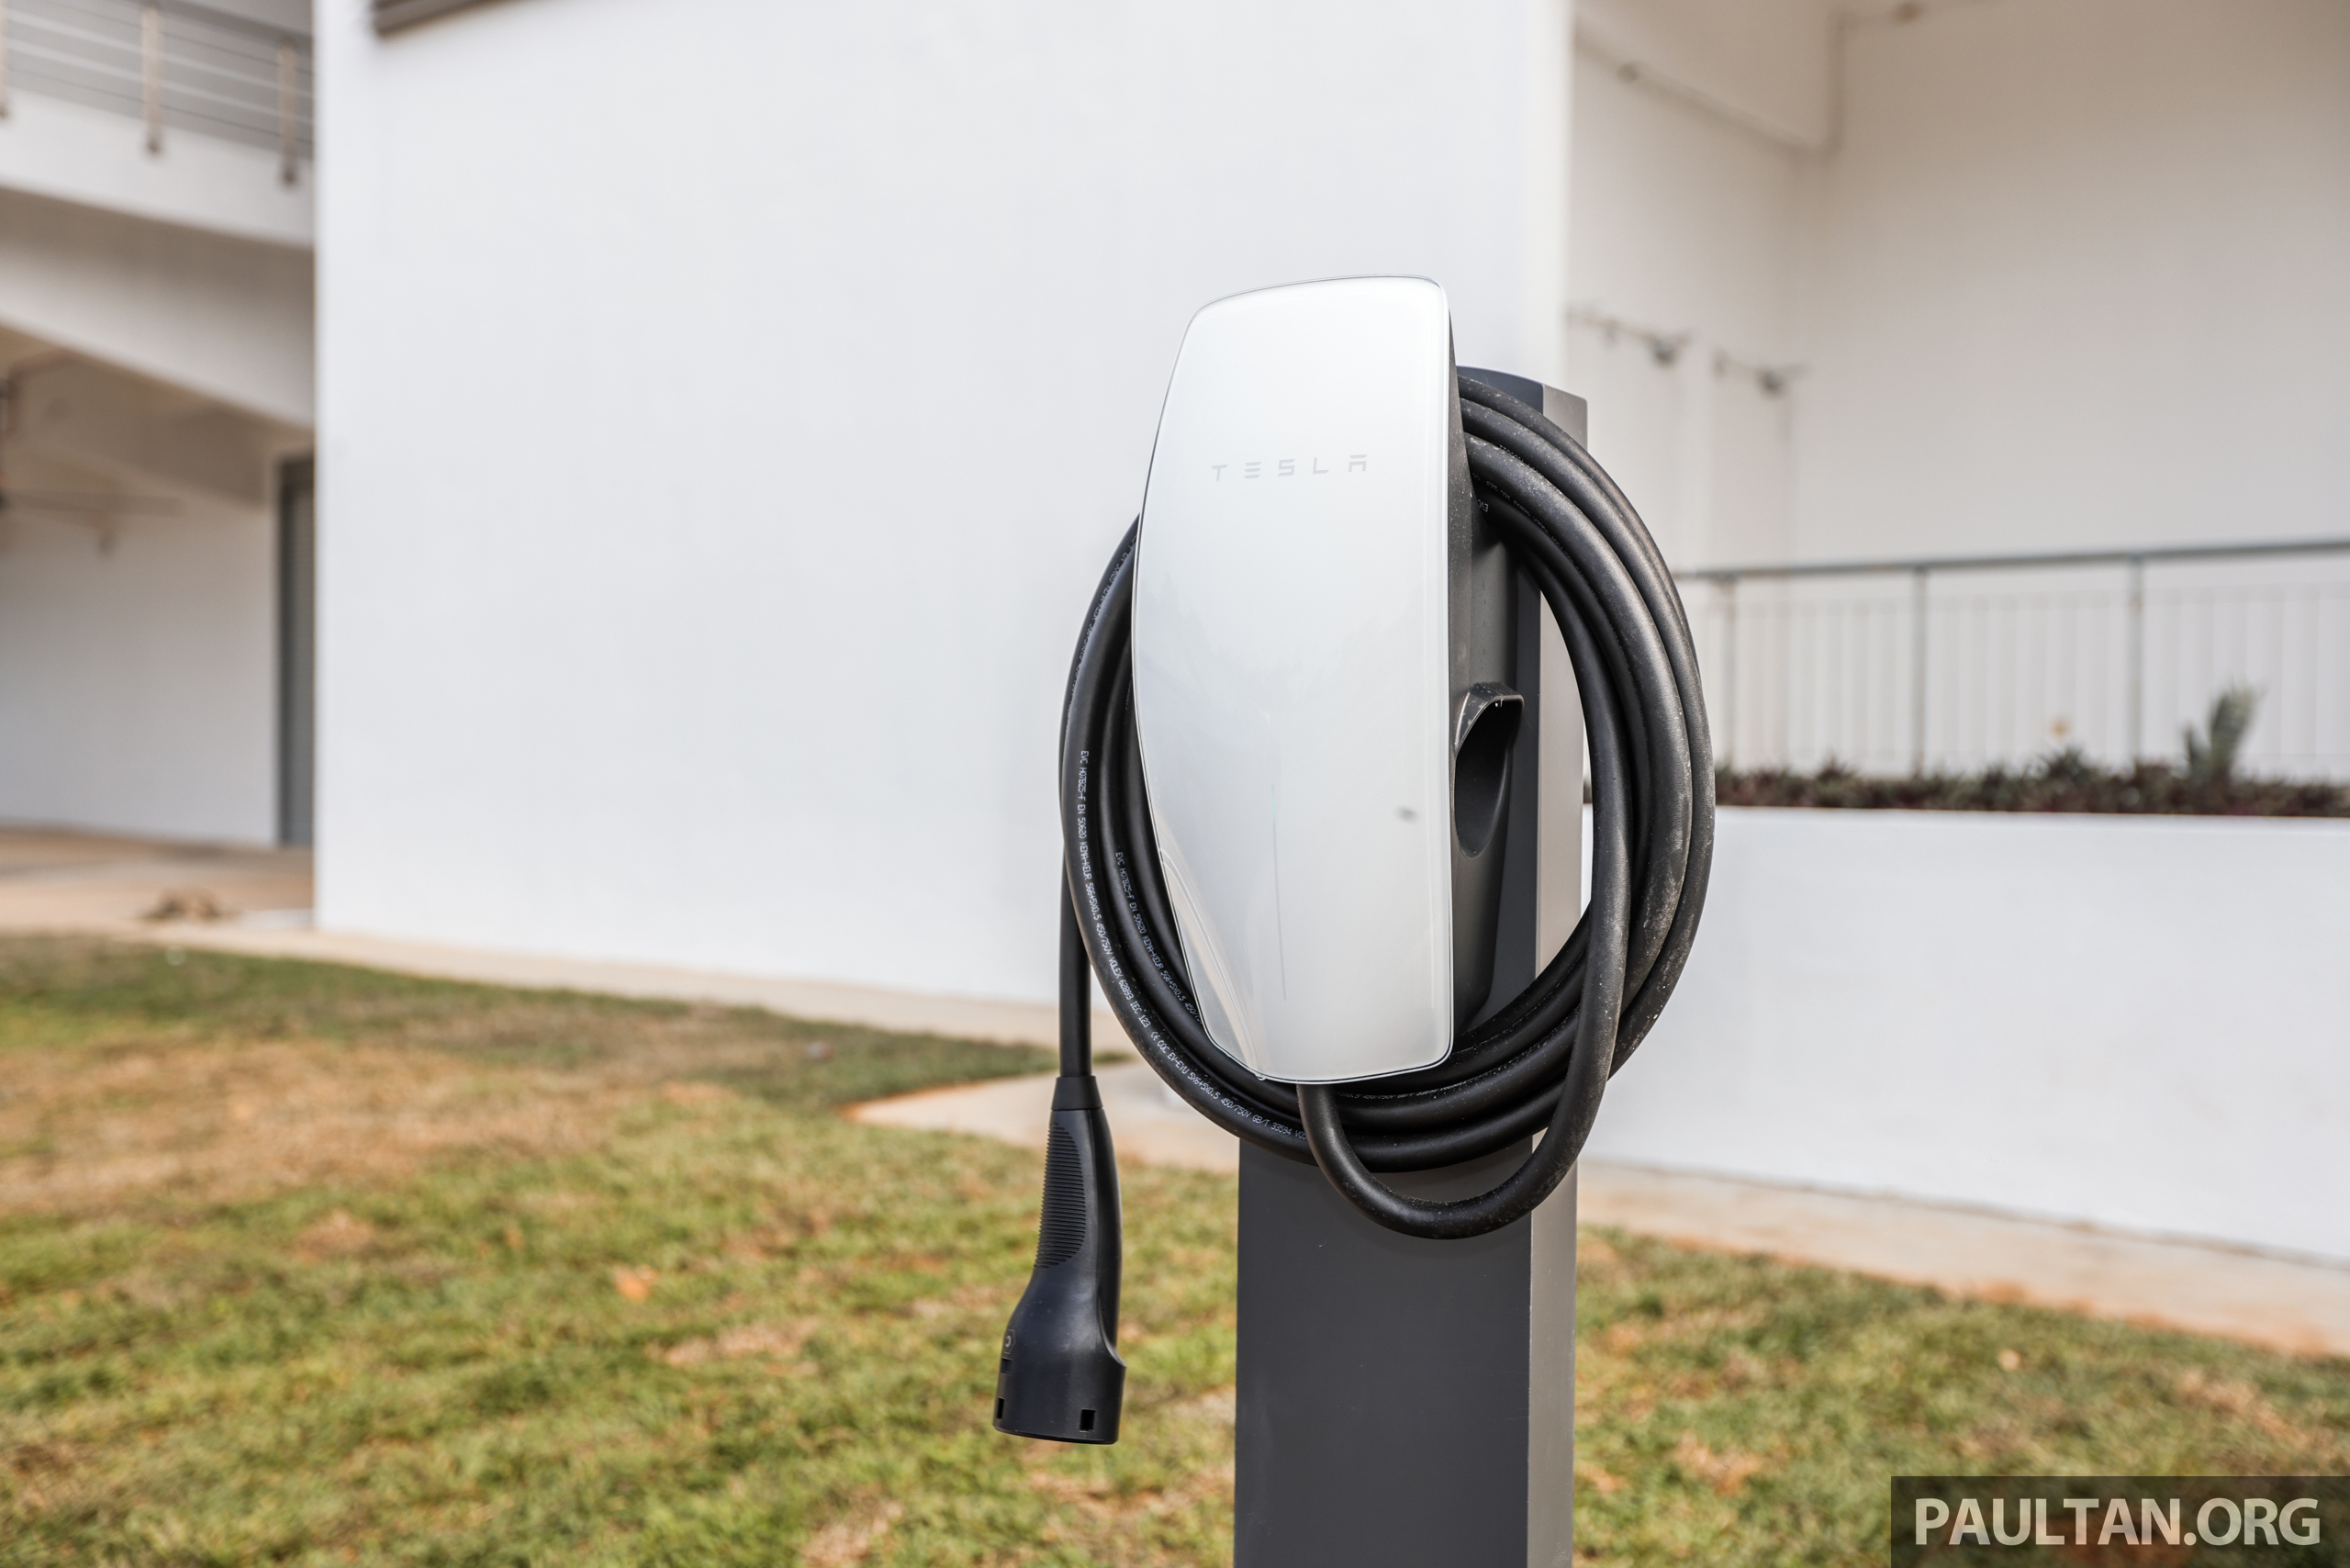 Tesla Wall Connector can only be used to charge Teslas - charging other EVs  will void warranty 